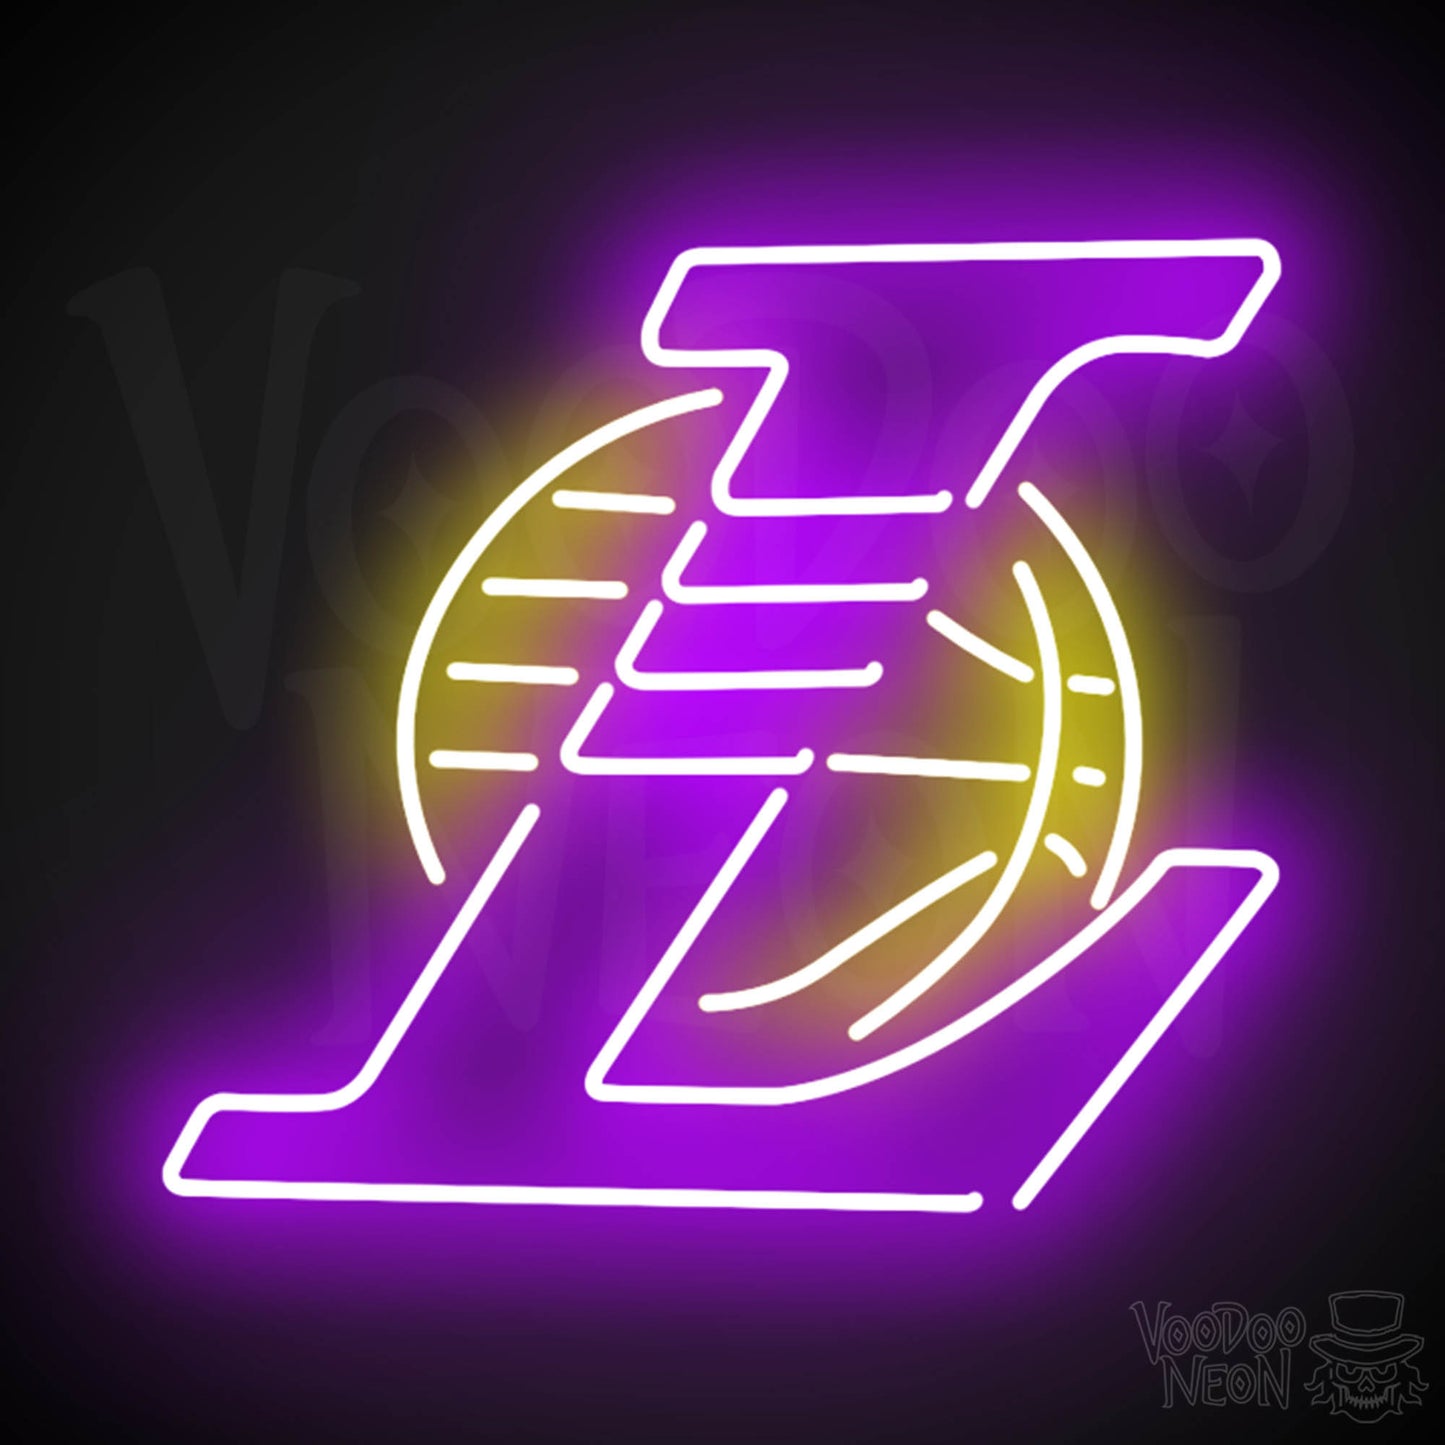 Los Angeles Lakers Neon Sign - Los Angeles Lakers Sign - Neon Lakers Logo Wall Art - Color Multi-Color